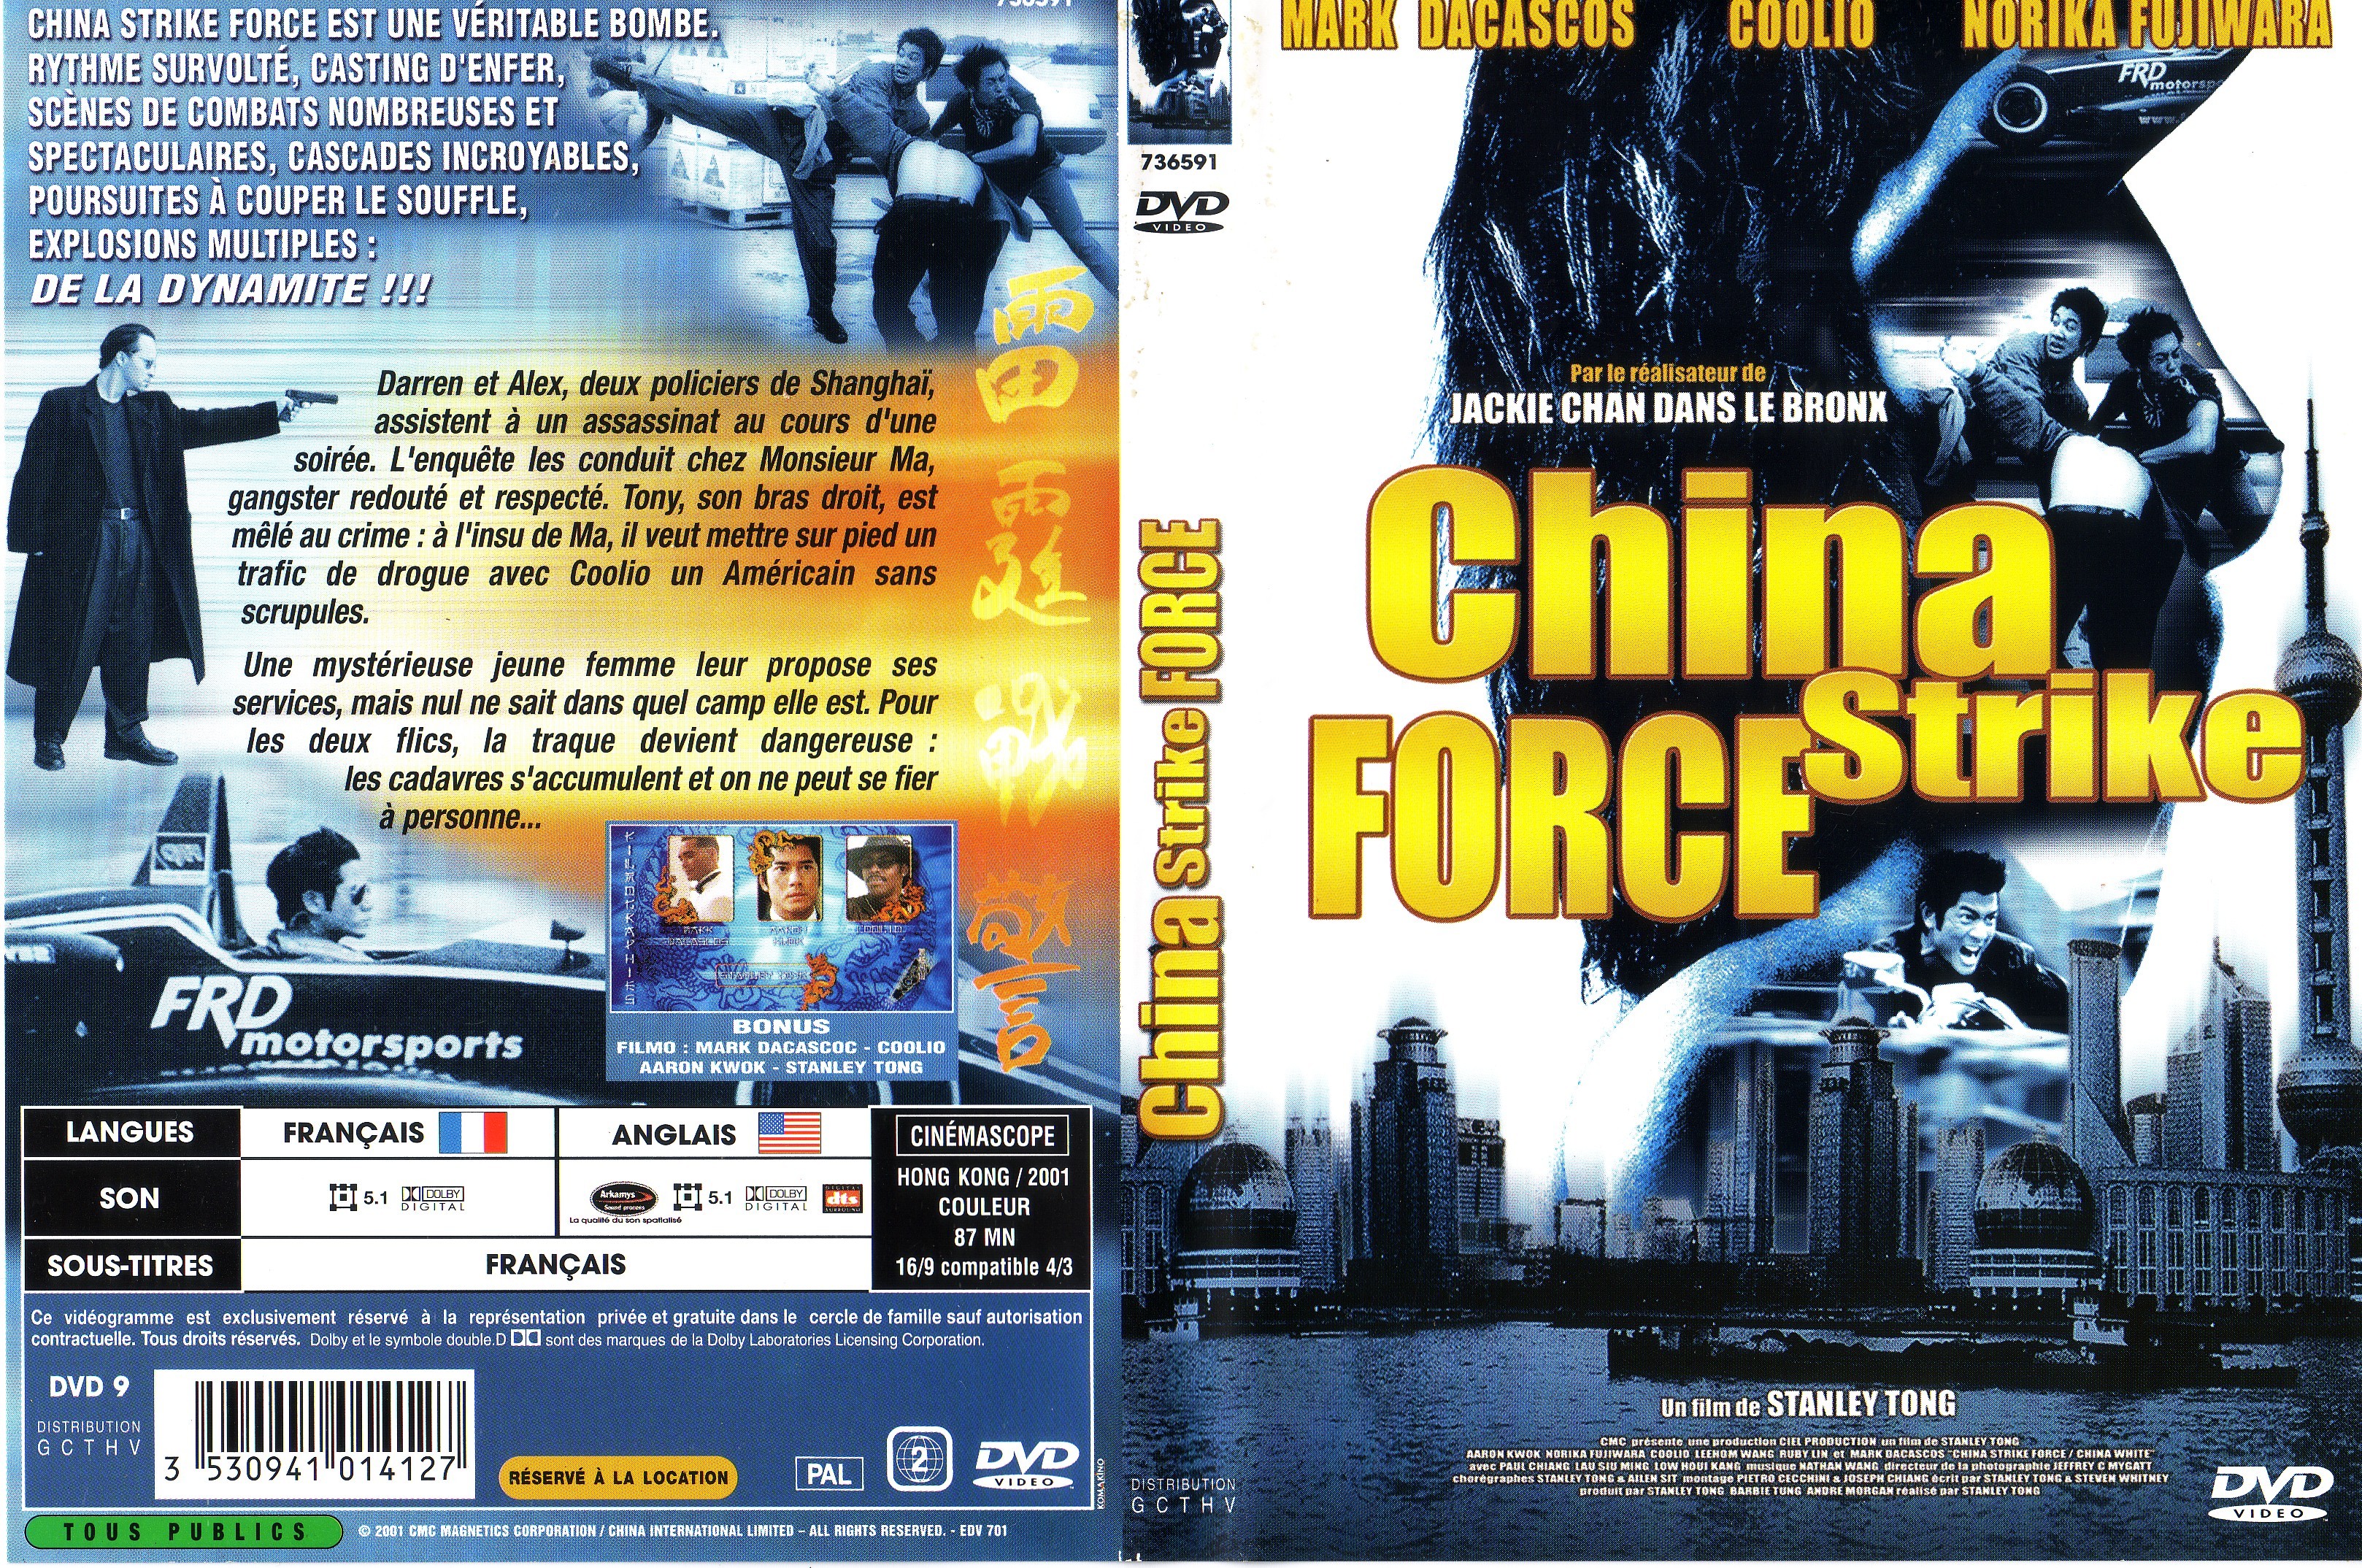 Jaquette DVD China strike force